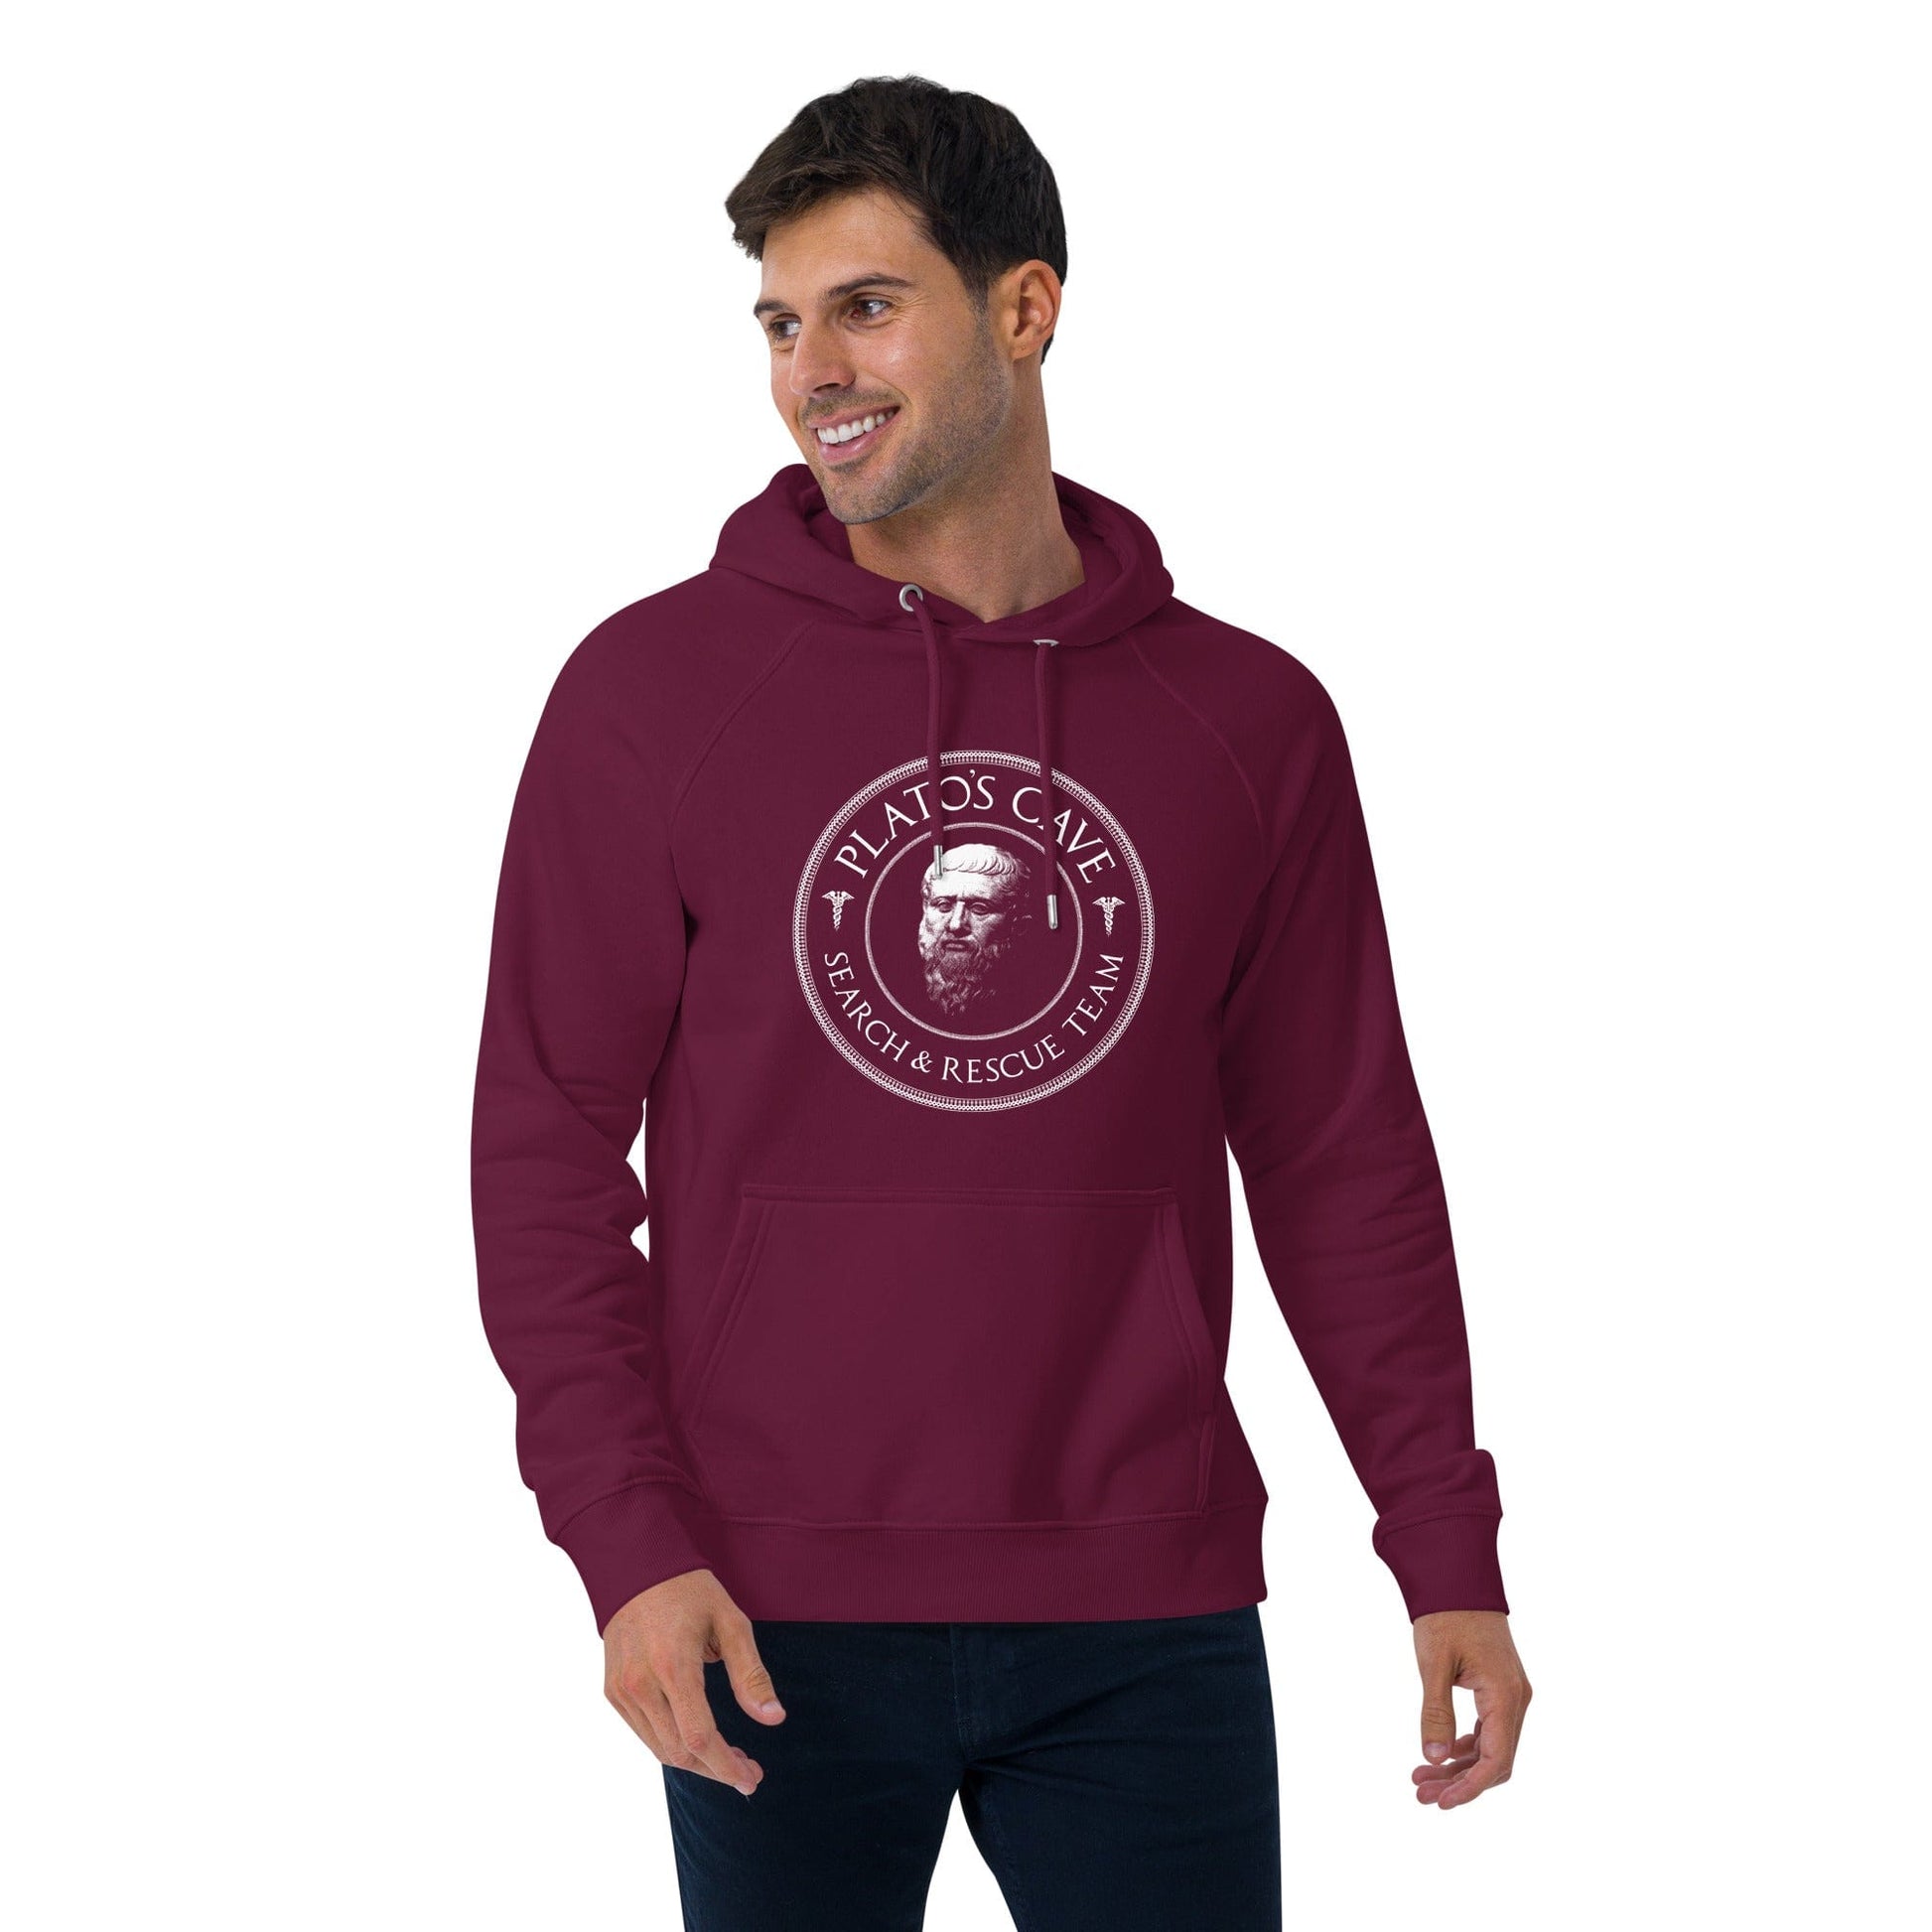 Plato's Cave Search and Rescue Team - Eco Hoodie